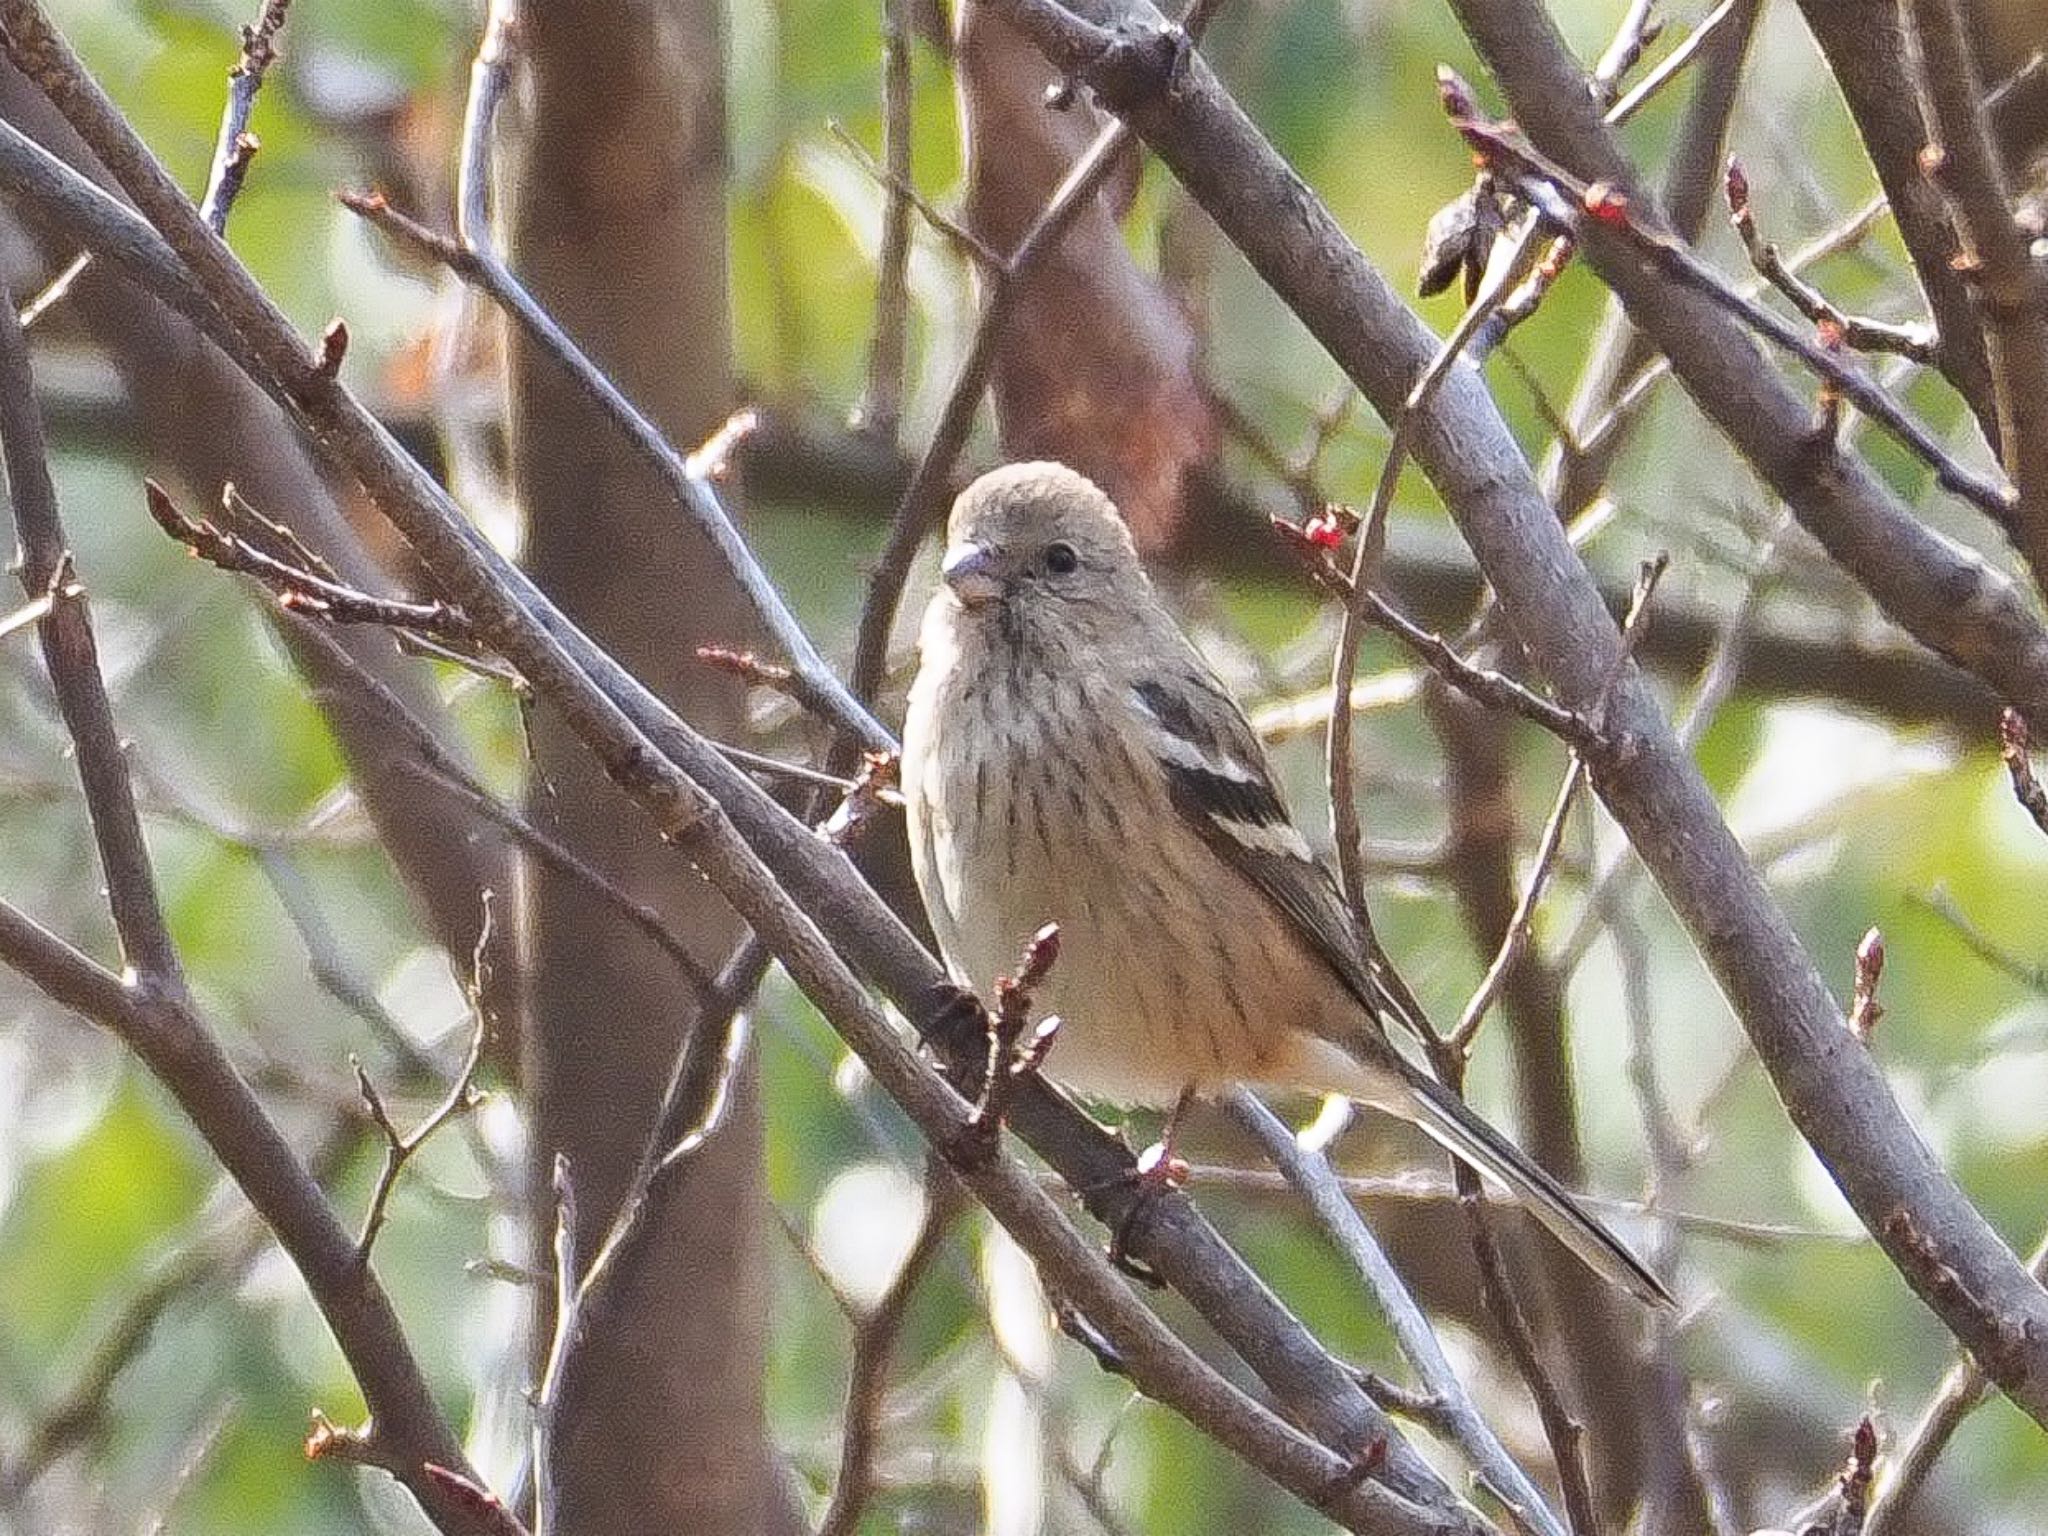 Photo of Siberian Long-tailed Rosefinch at 瑞浪市 by きずきず